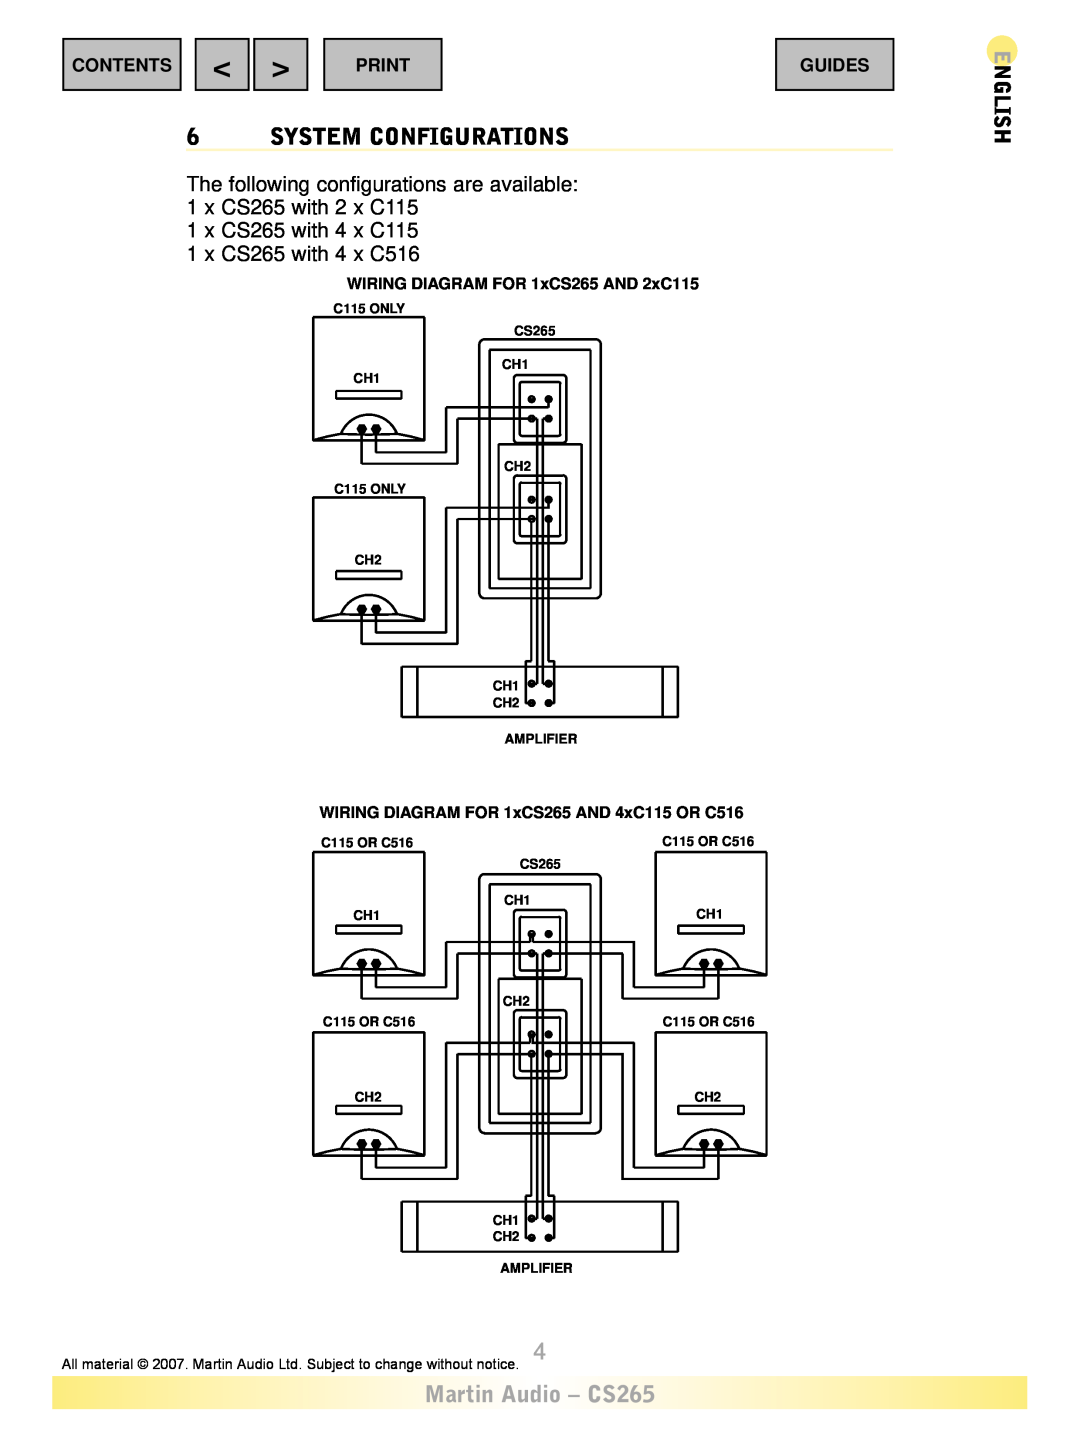 Martin Audio System Configurations, Martin Audio - CS265, English, Contents, Print, Guides, Amplifier, C115 OR C516 